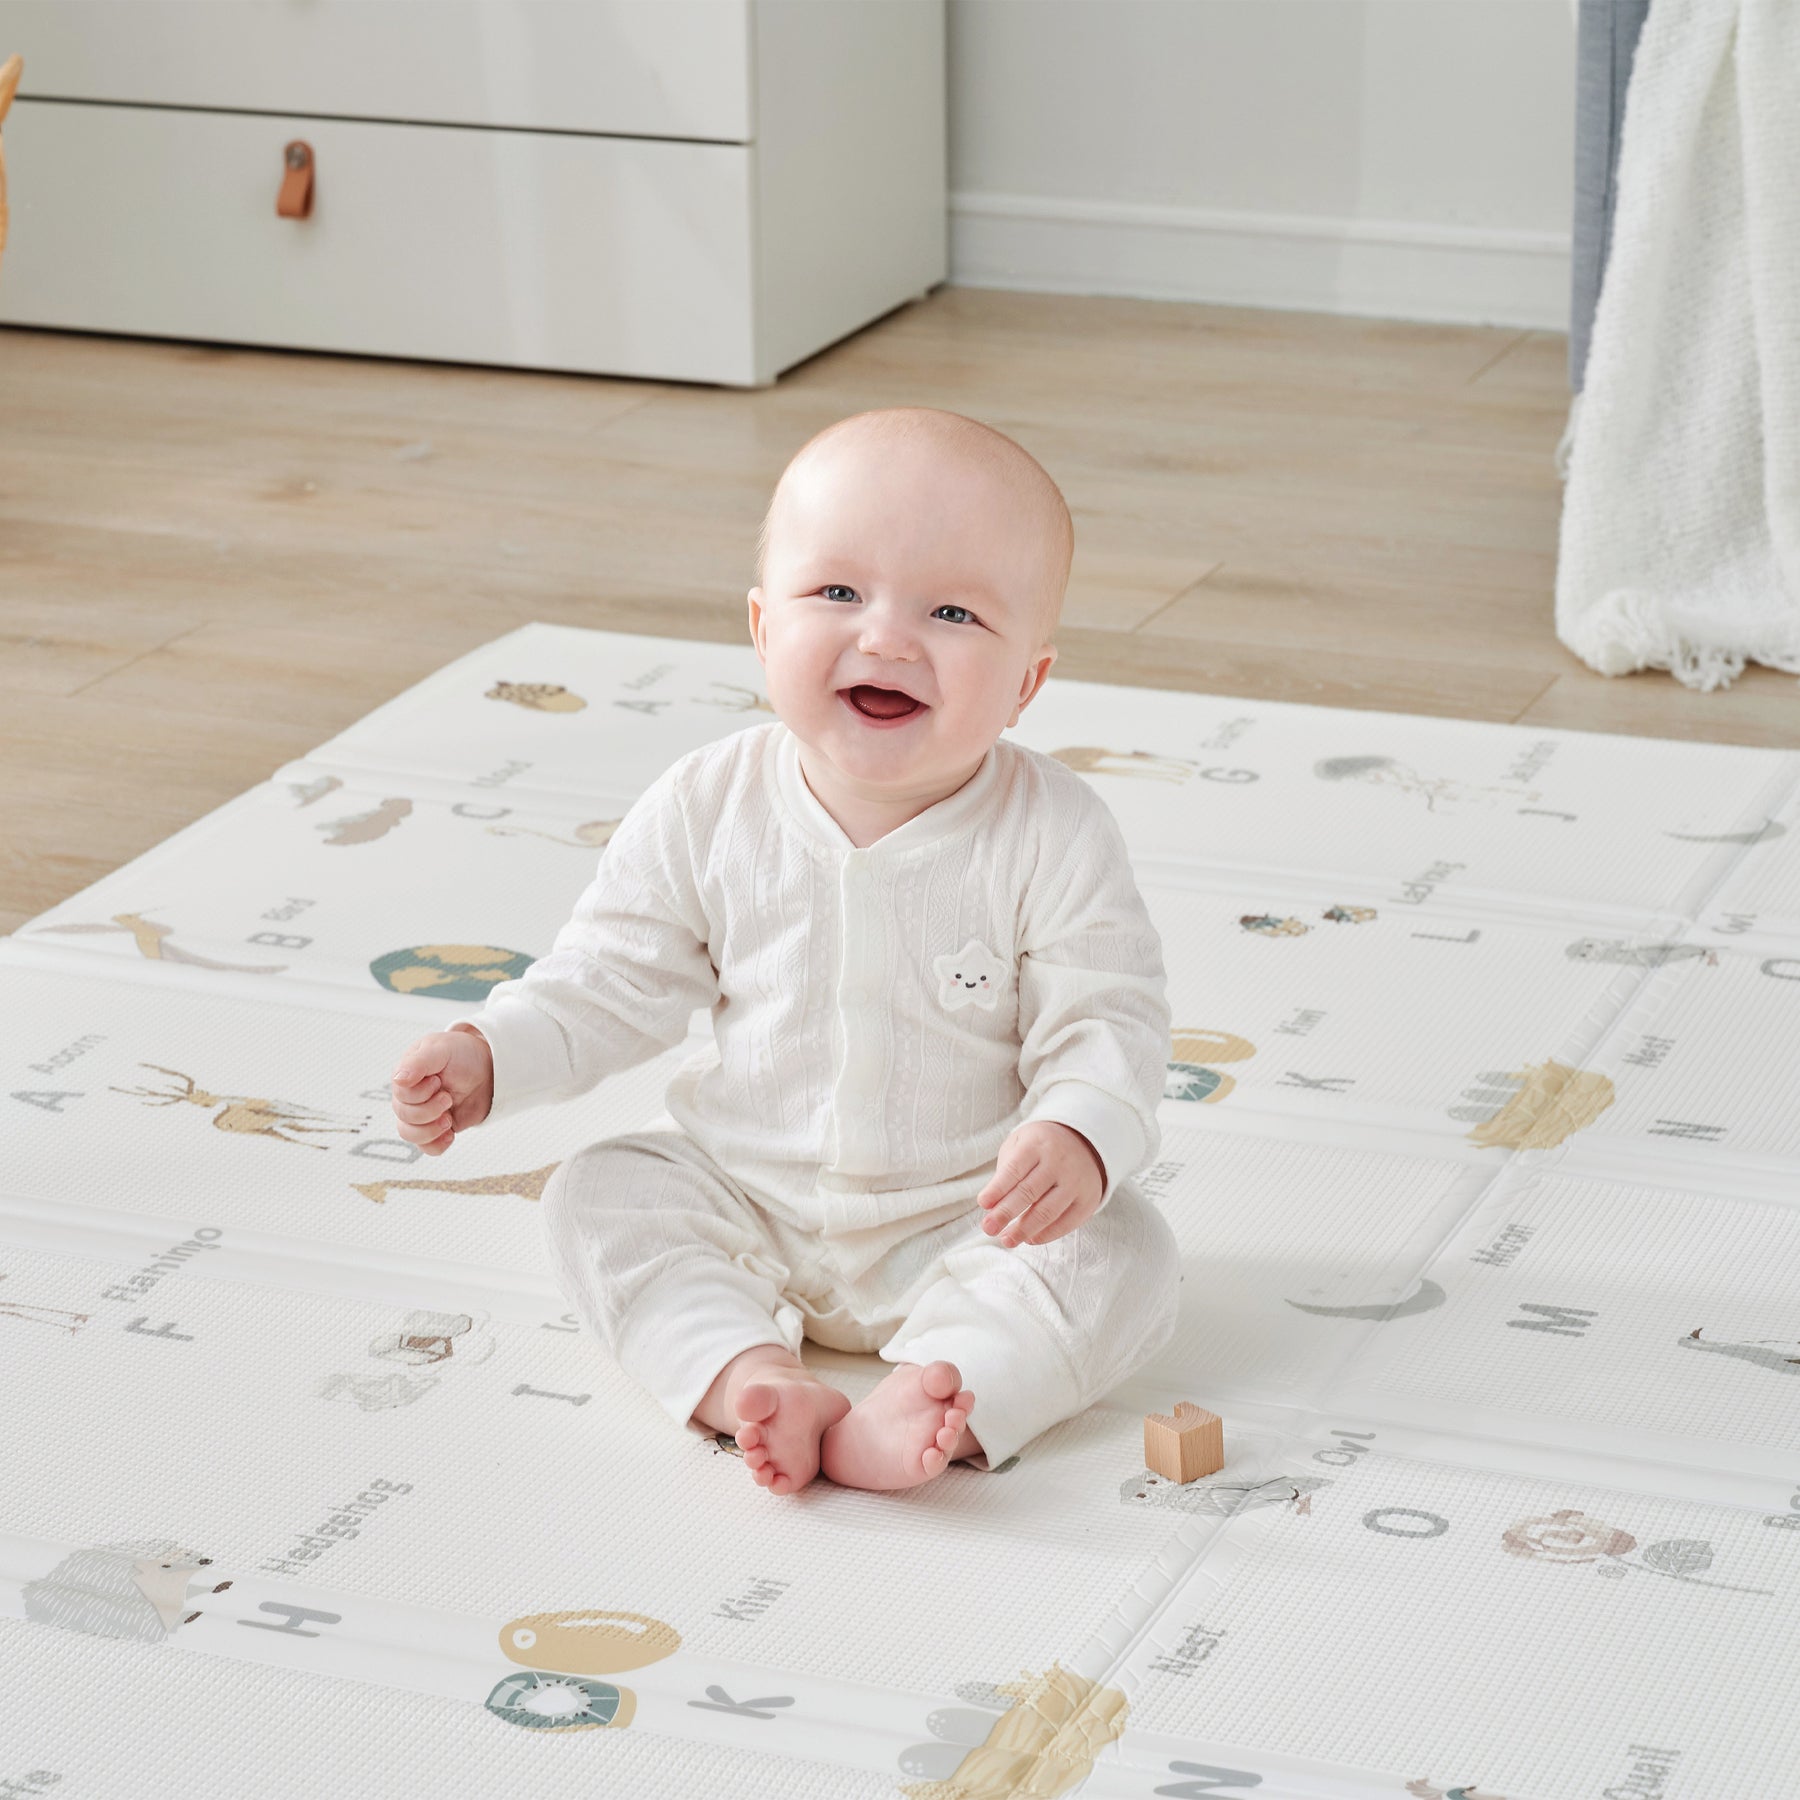 Baby Playpen Mat, Extra Large Thick Playmat, Non Slip Cushioned